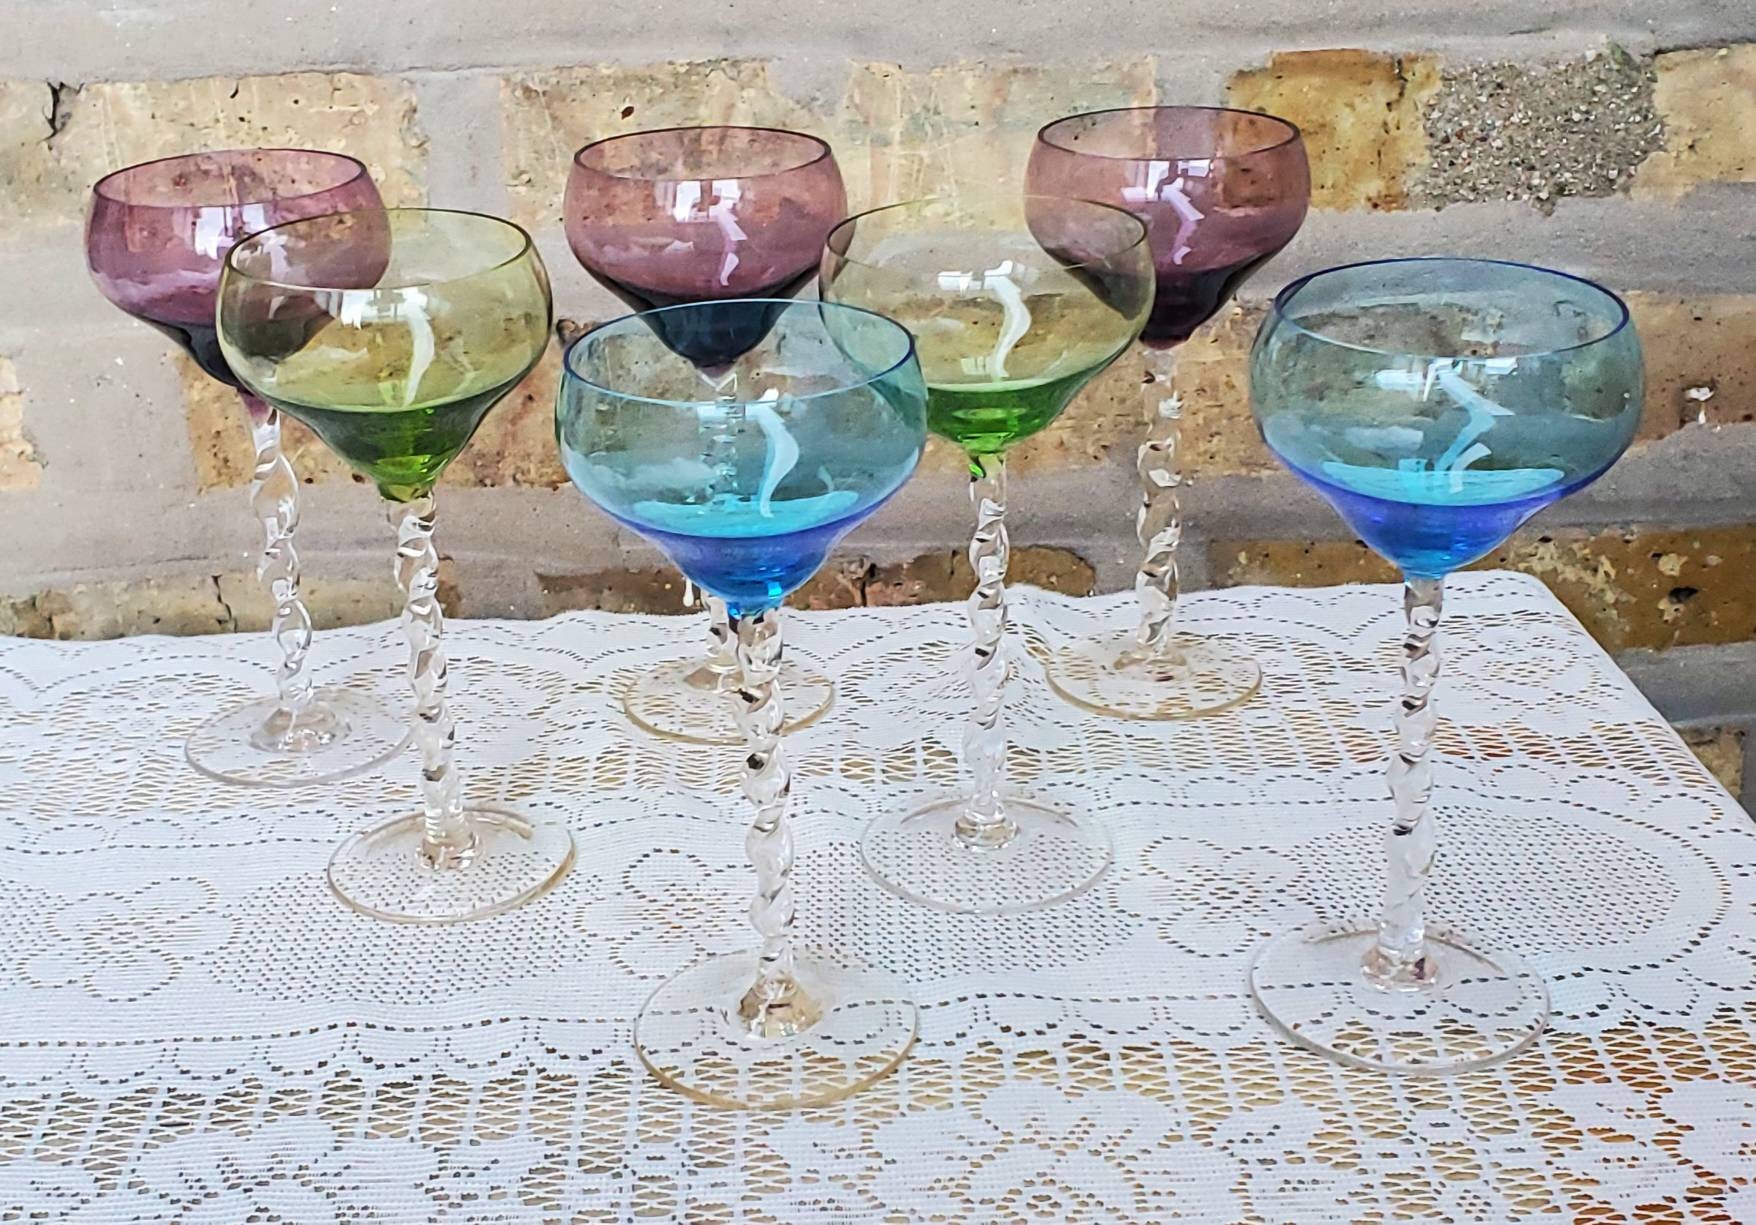 Vintage Small Wine Glasses, Set of 4, Twisted Clear Stems, Wine Tasting  Party glasses, Port Wine, Liquor Glasses